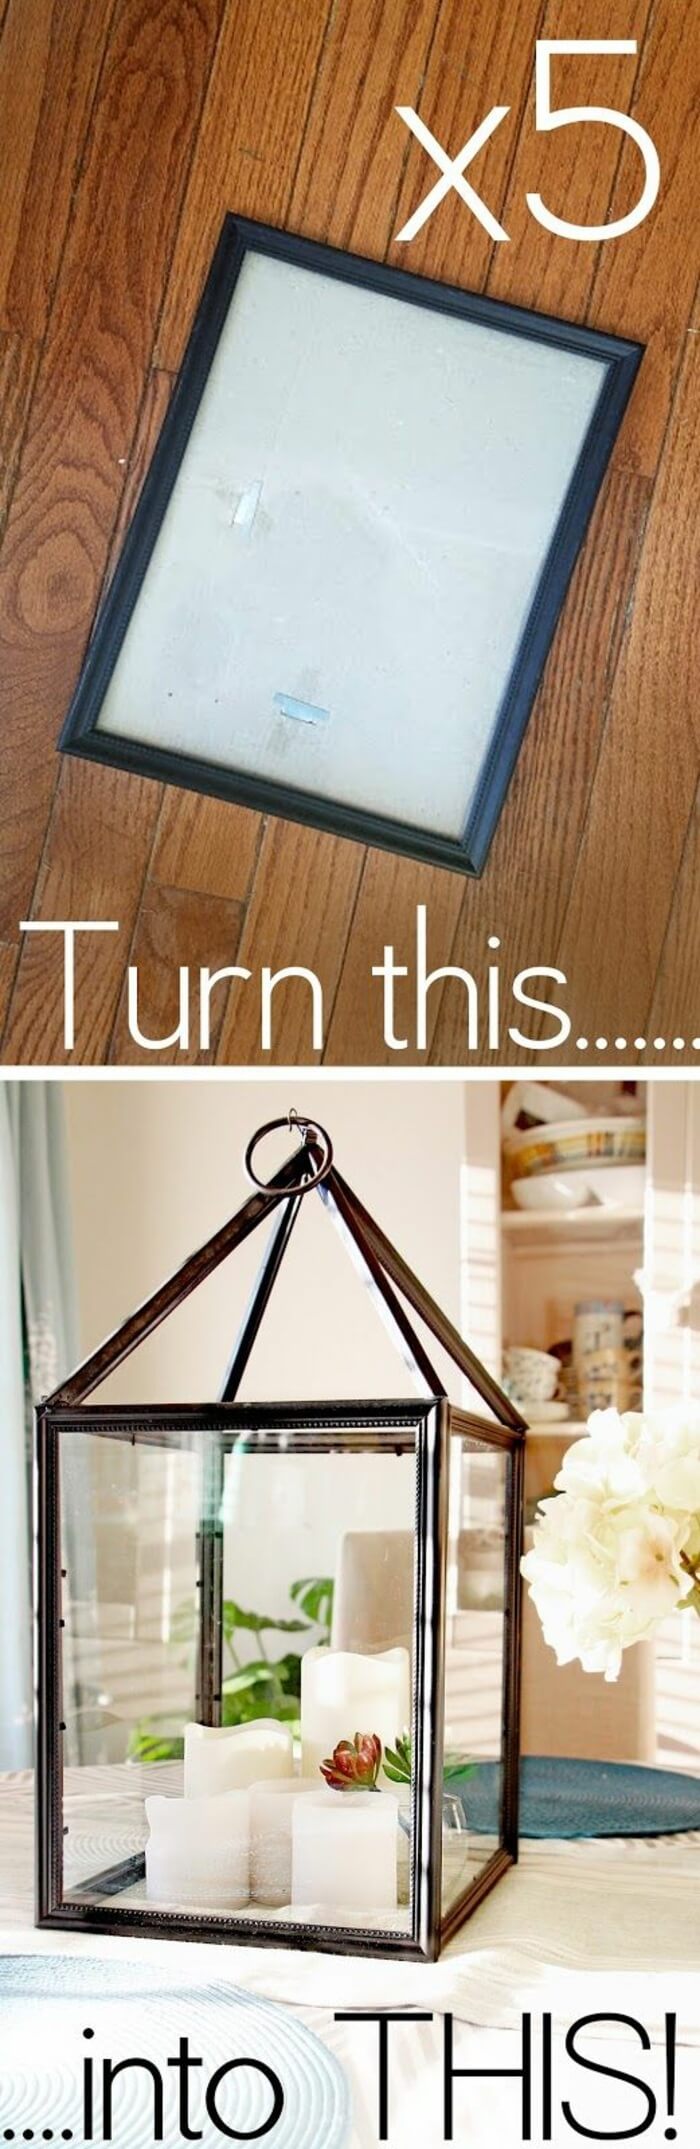 Rustic Upcycled Mirror Candle Holder